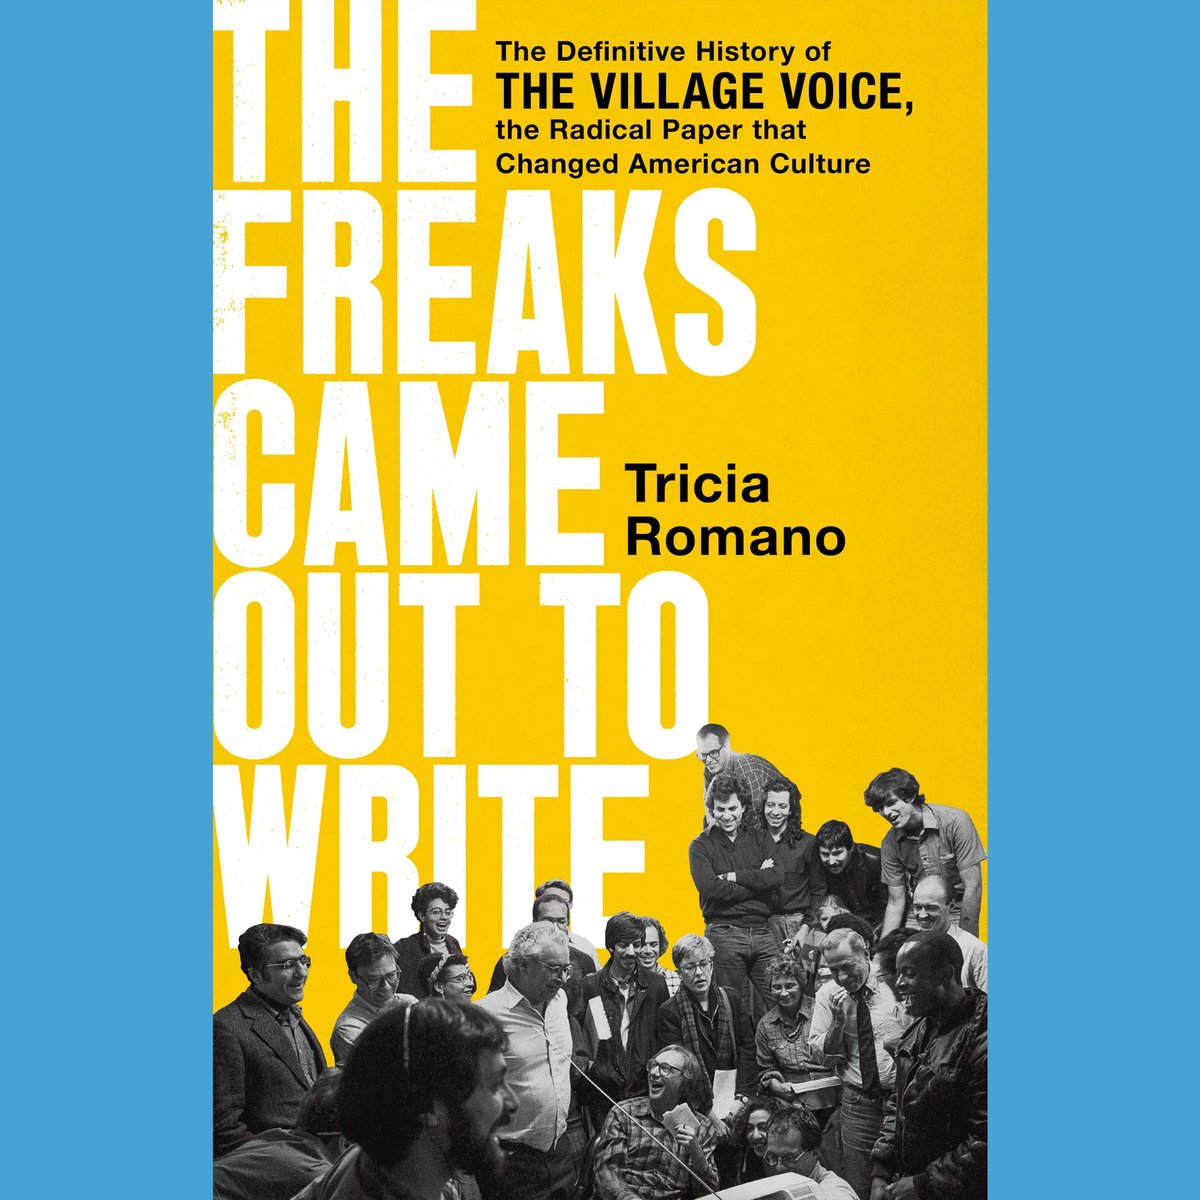 Author and journalist @tromano joins @danielfford on tomorrow's show to discuss her oral history about the Village Voice. Subscribe and tune in! apple.co/4bmzB8s #writers #podcast #writingcommunity #WBPN